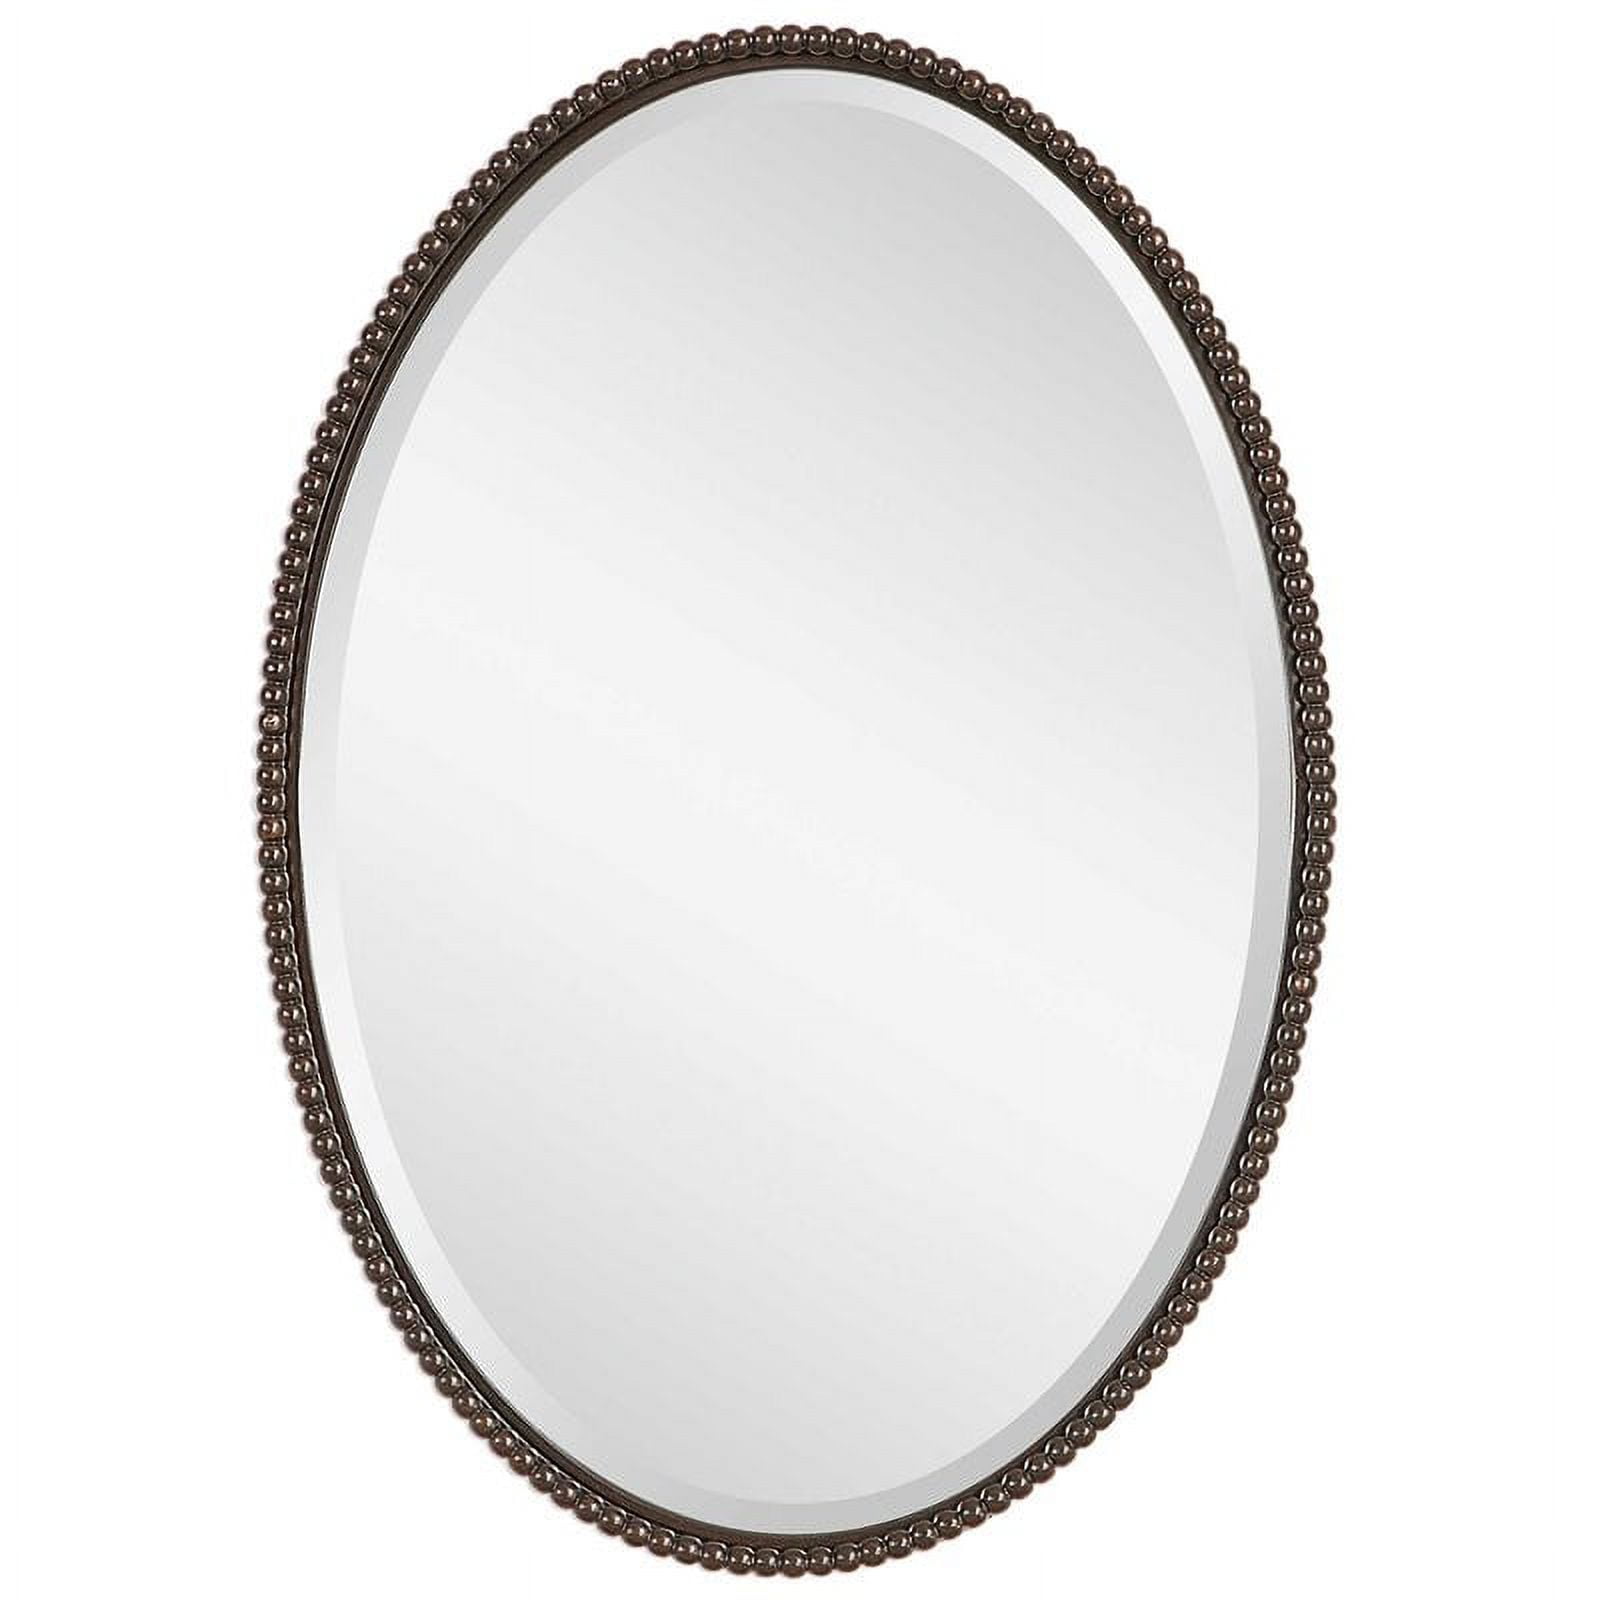 Beaumont Lane Beaded Metal Oval Wall Mirror in Light Distressed Bronze 